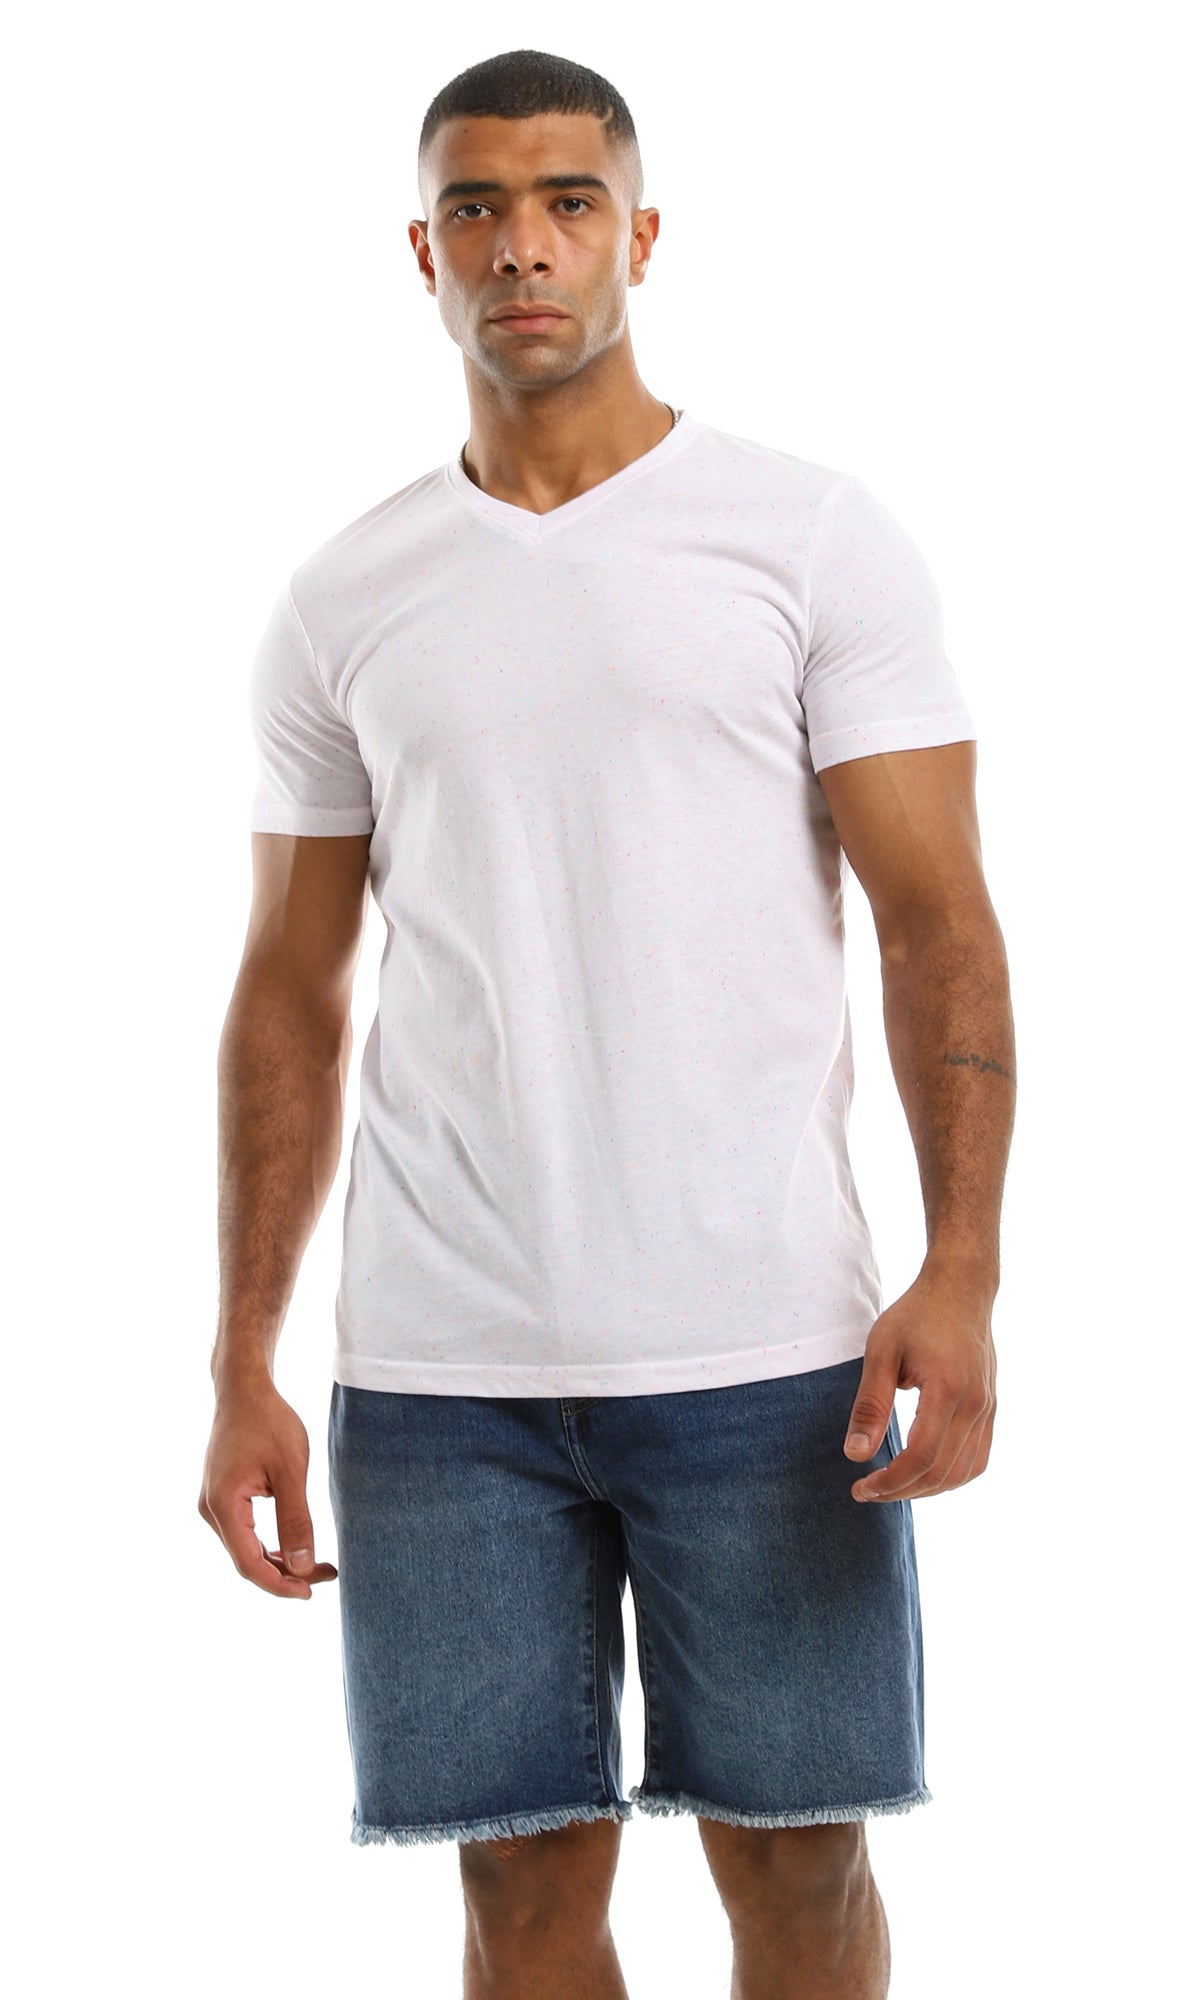 97924 White V-Neck T-Shirt With Neon Colorful Stitches